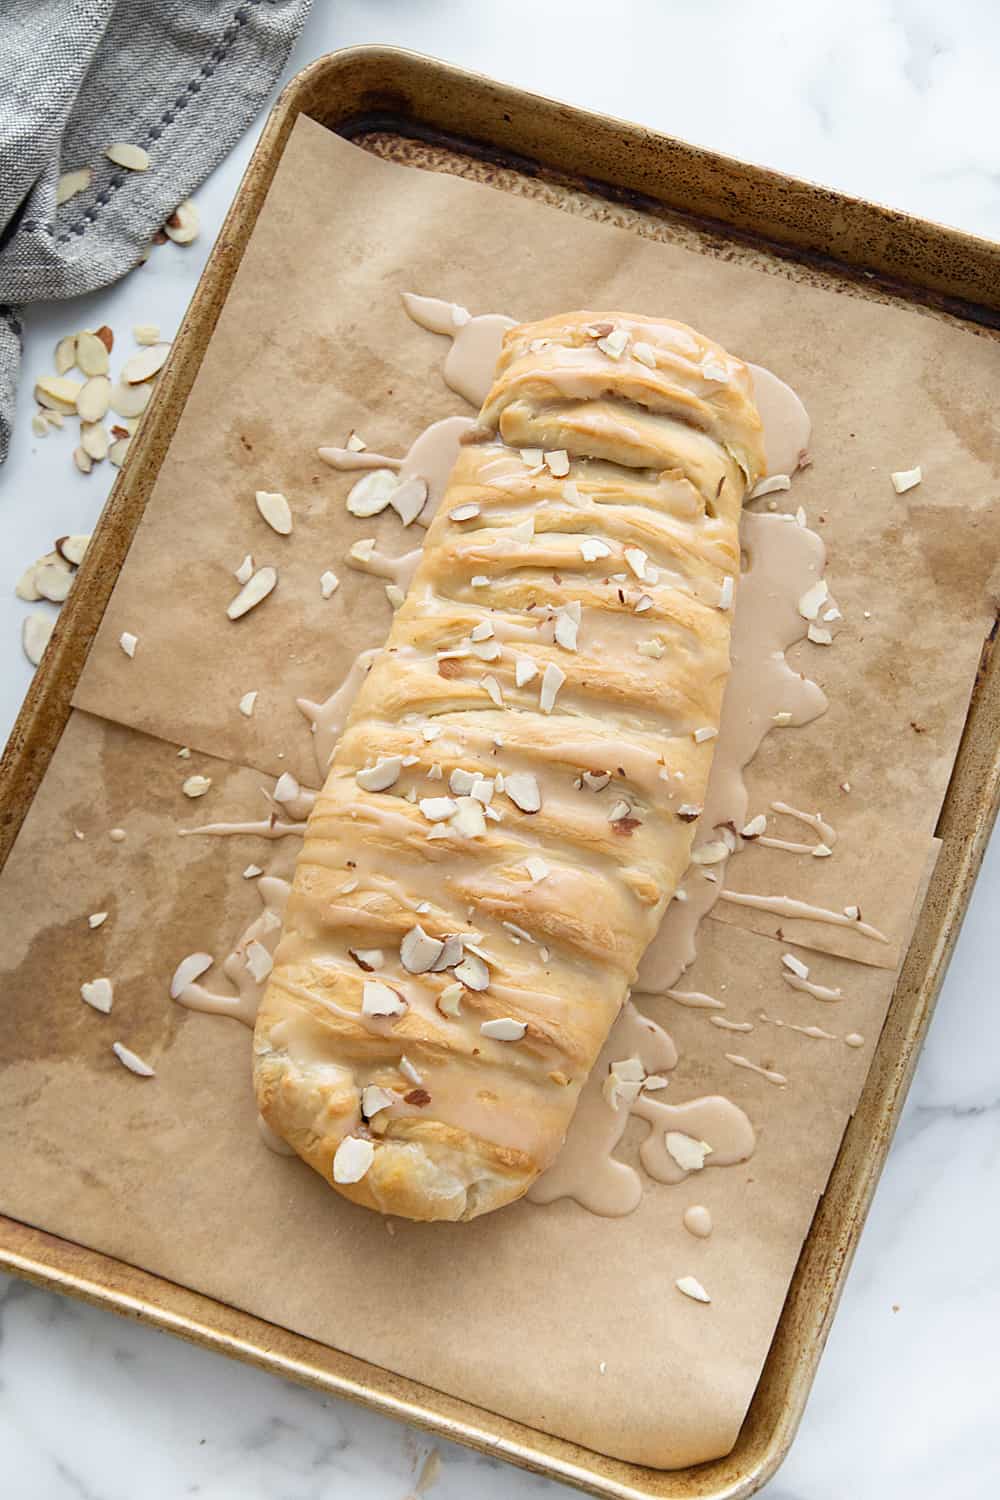 Easy Almond Braid - This easy almond braid is simple *and* totally scrumptious. Good luck not eating the entire beautifully braided dessert in one sitting! #halfscratched #dessert #brunch #almond #almonddessert #baking #almondbraid #braideddessert #recipe #dessertrecipe